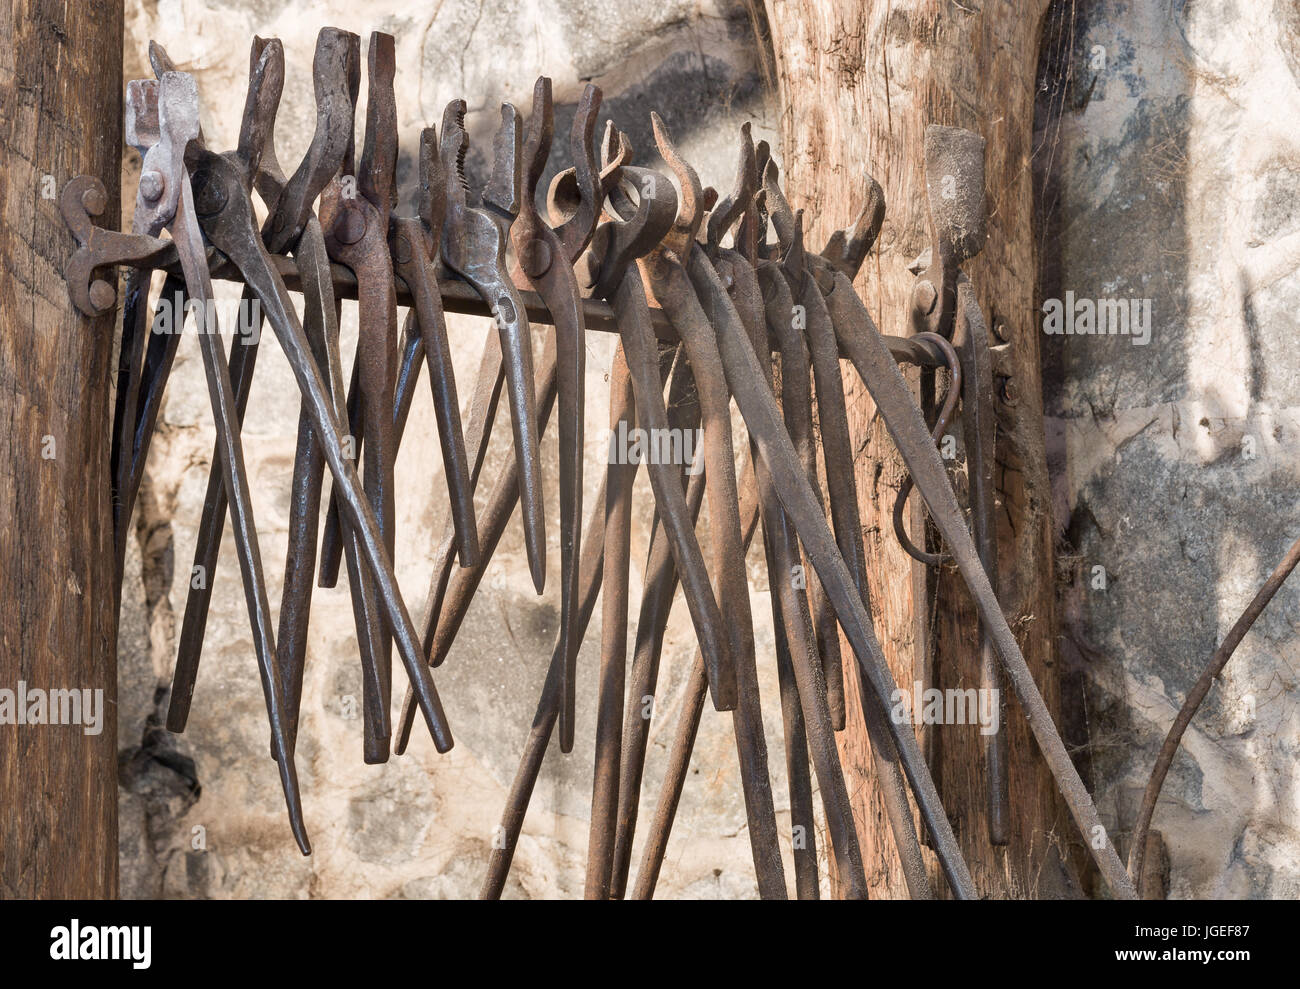 Blacksmith Tongs Tool Hanged In Forge Stock Photo - Download Image